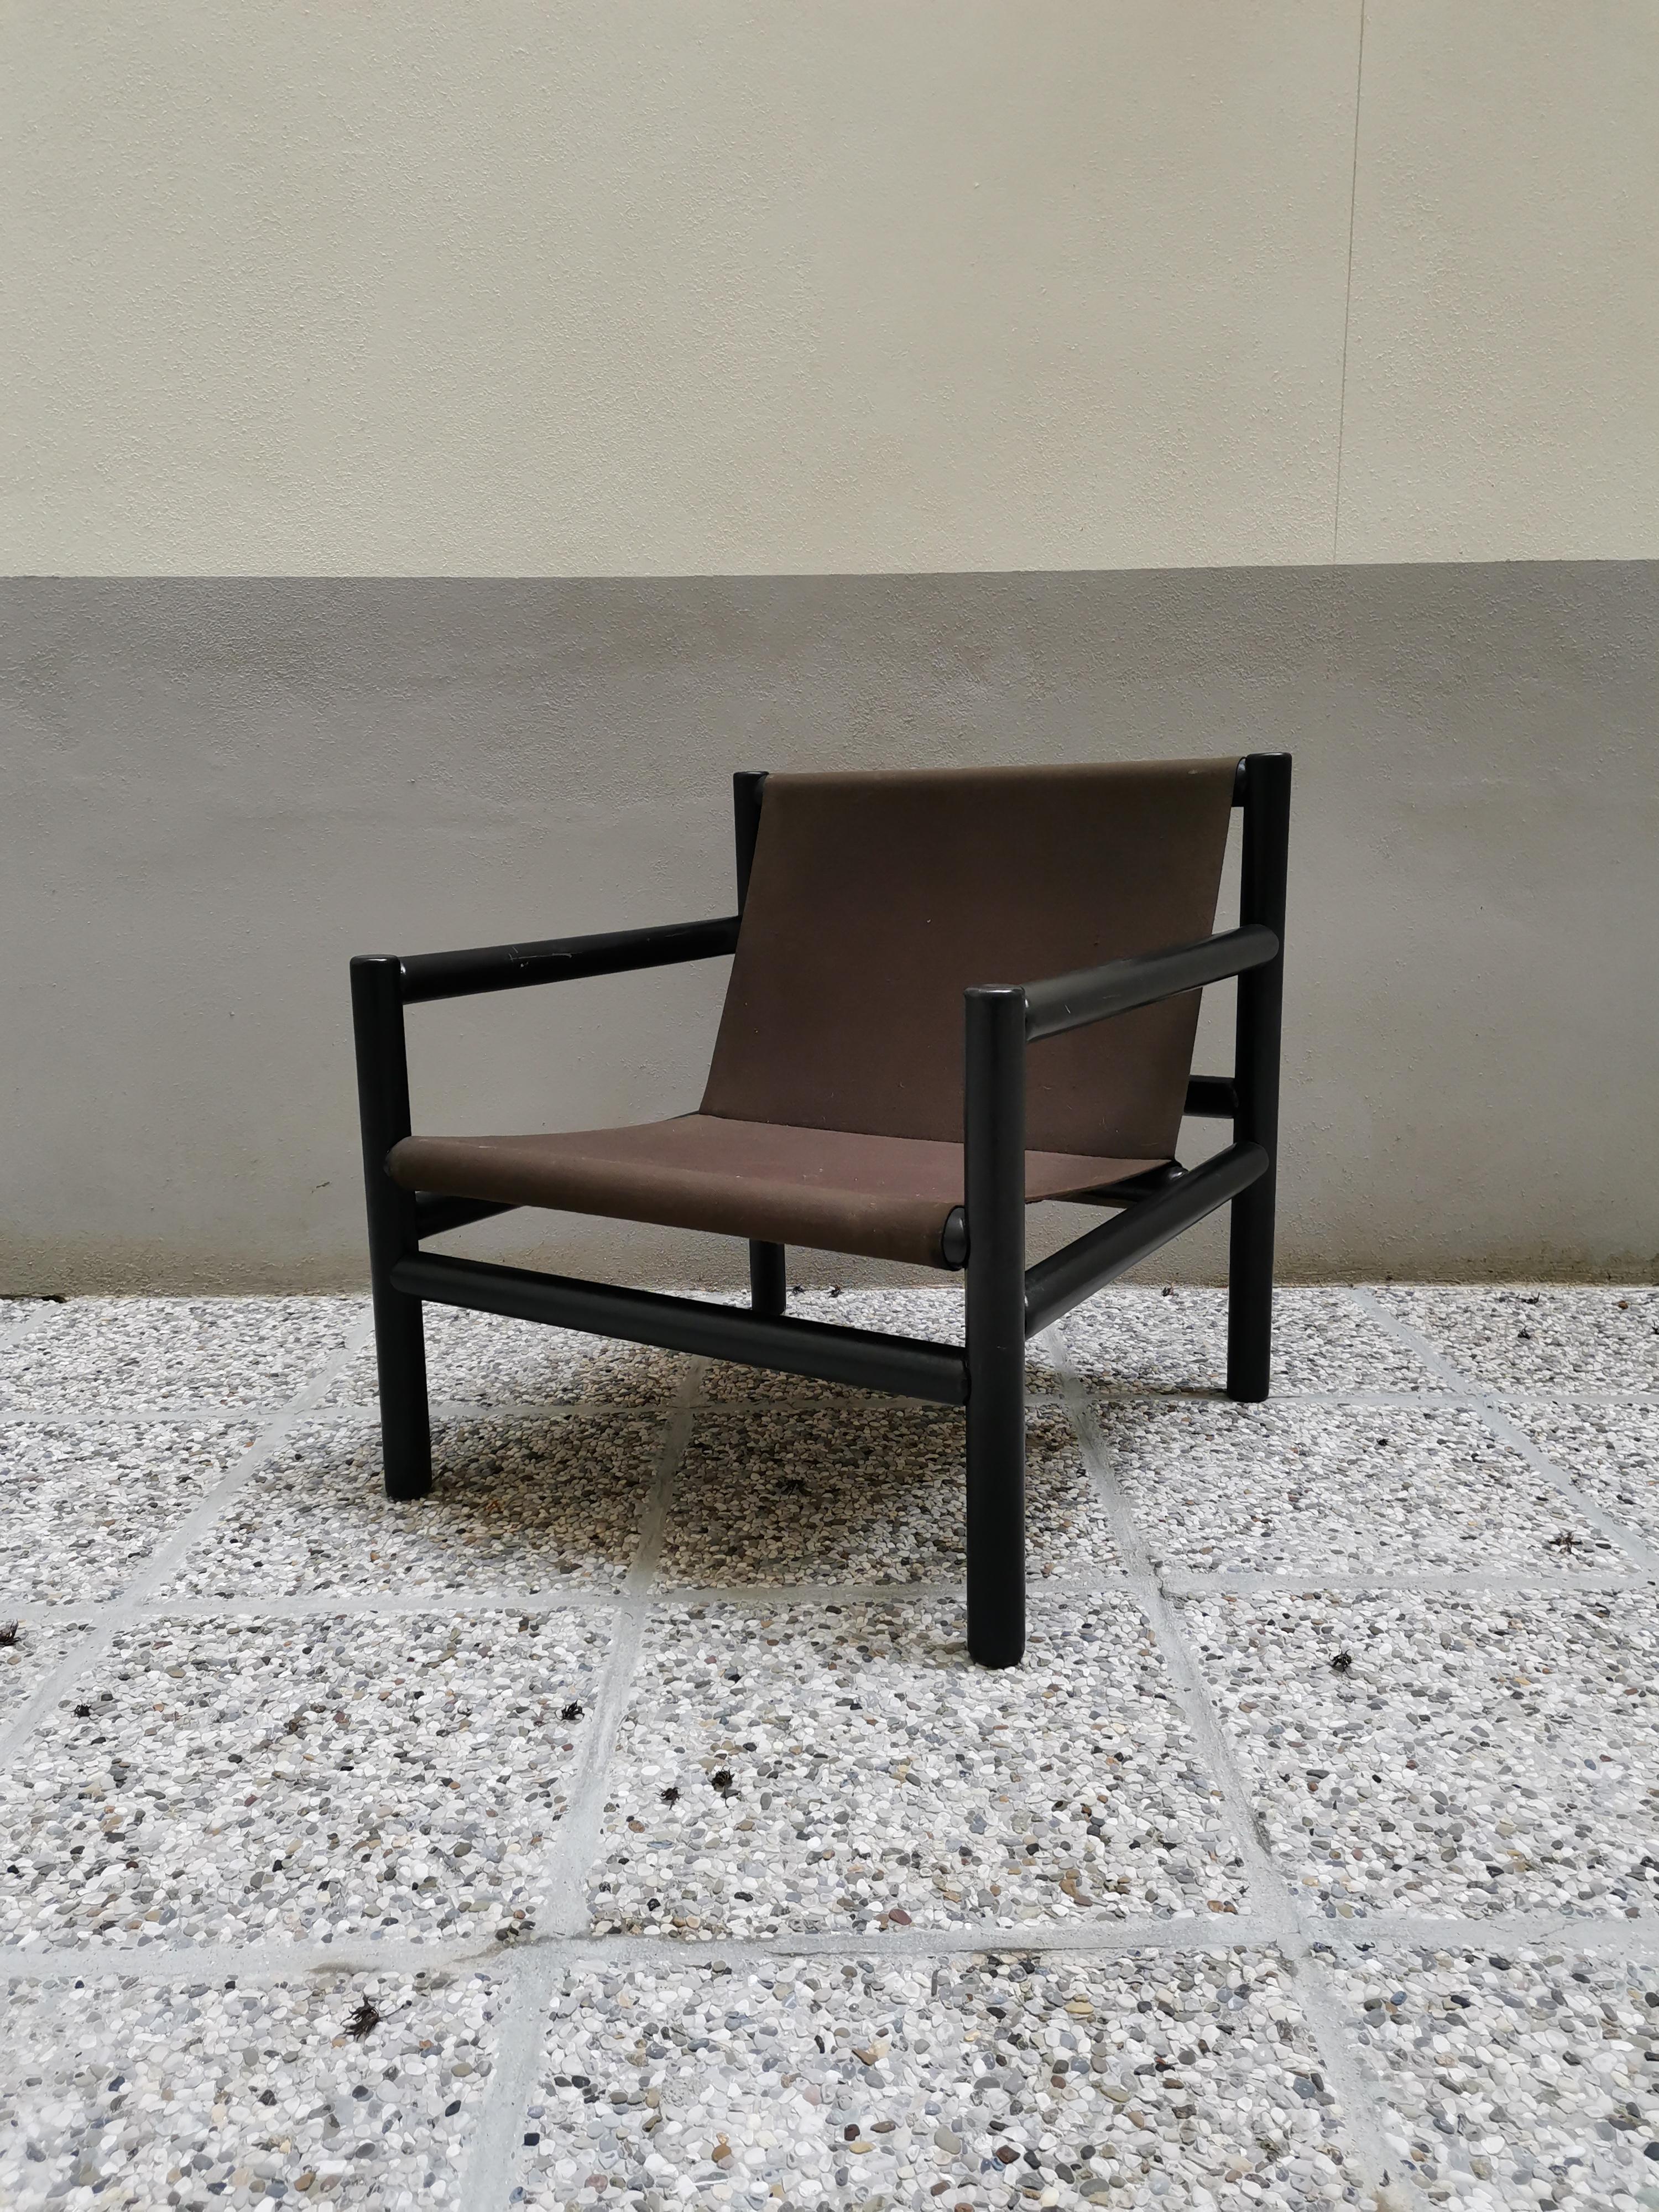 Armchair chair produced by Stol Kamnik, designer Branko Uršic (rare), Slovenia. Age: 1960s. It is made of a wooden frame painted in black with glossy finish and a brown textile. The chair was designed by Slovenian designer Branko Ursic in 1960 and